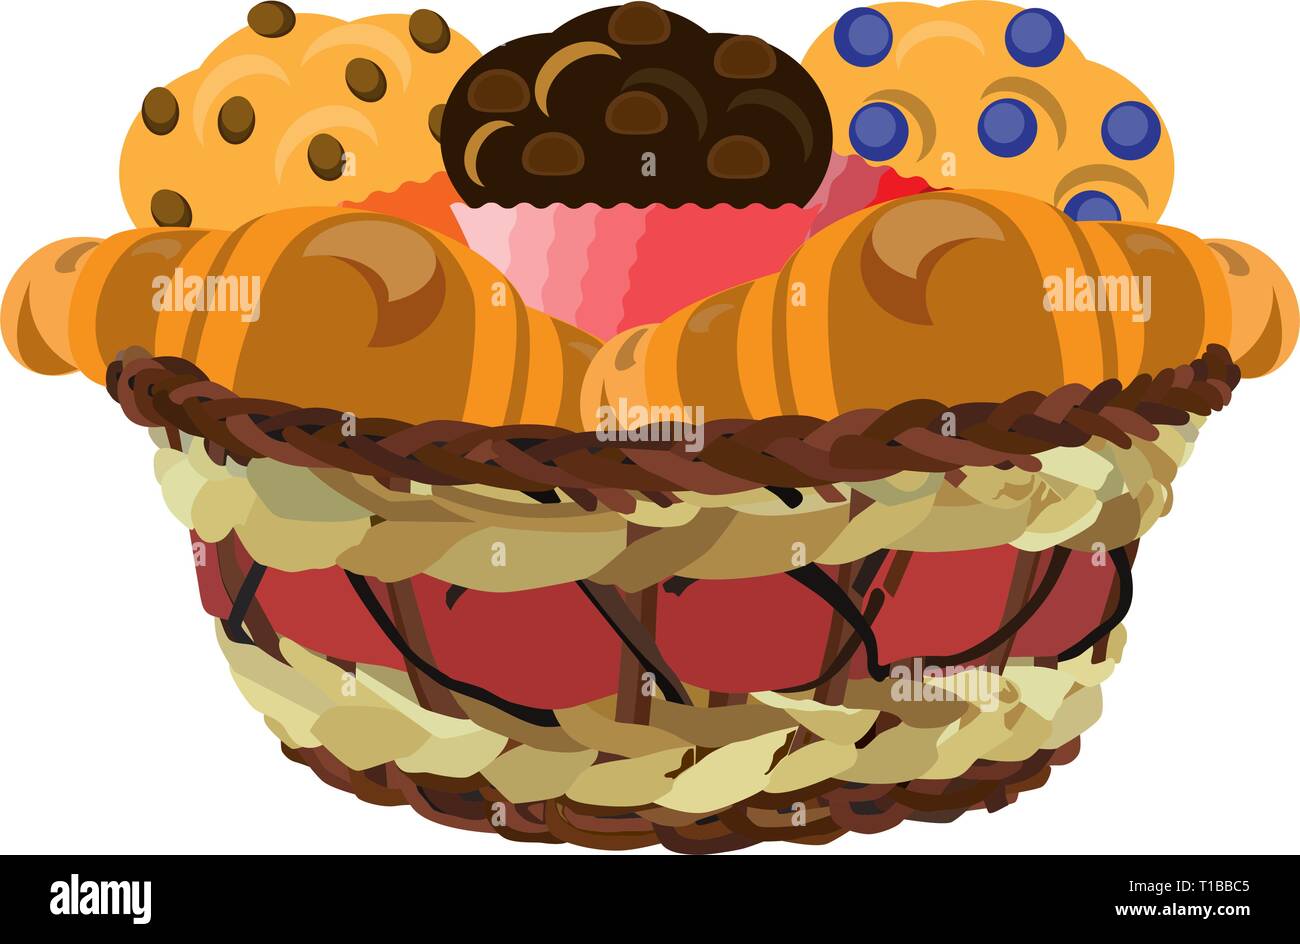 Wicker basket with muffins and croissants, vector flat illustration Stock Vector